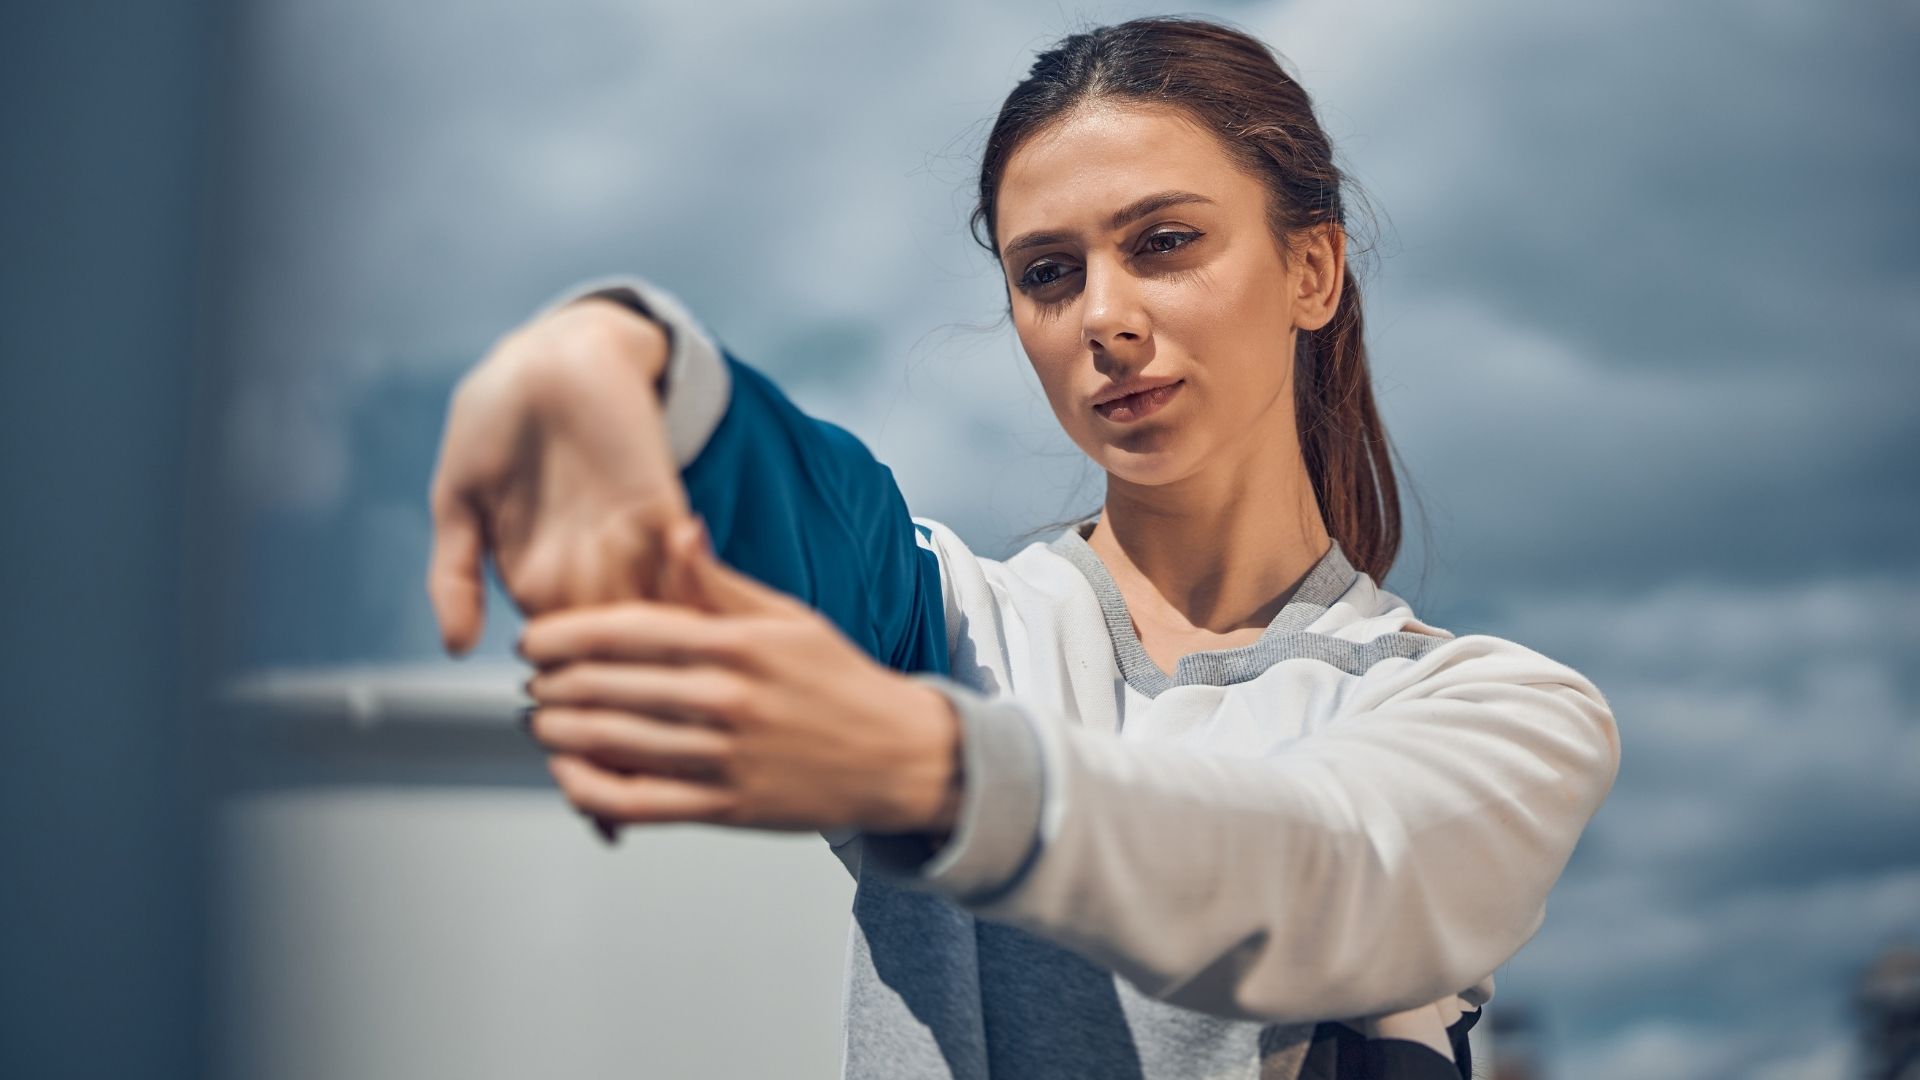 5 Effective Wrist Stretch Moves For Better Mobility